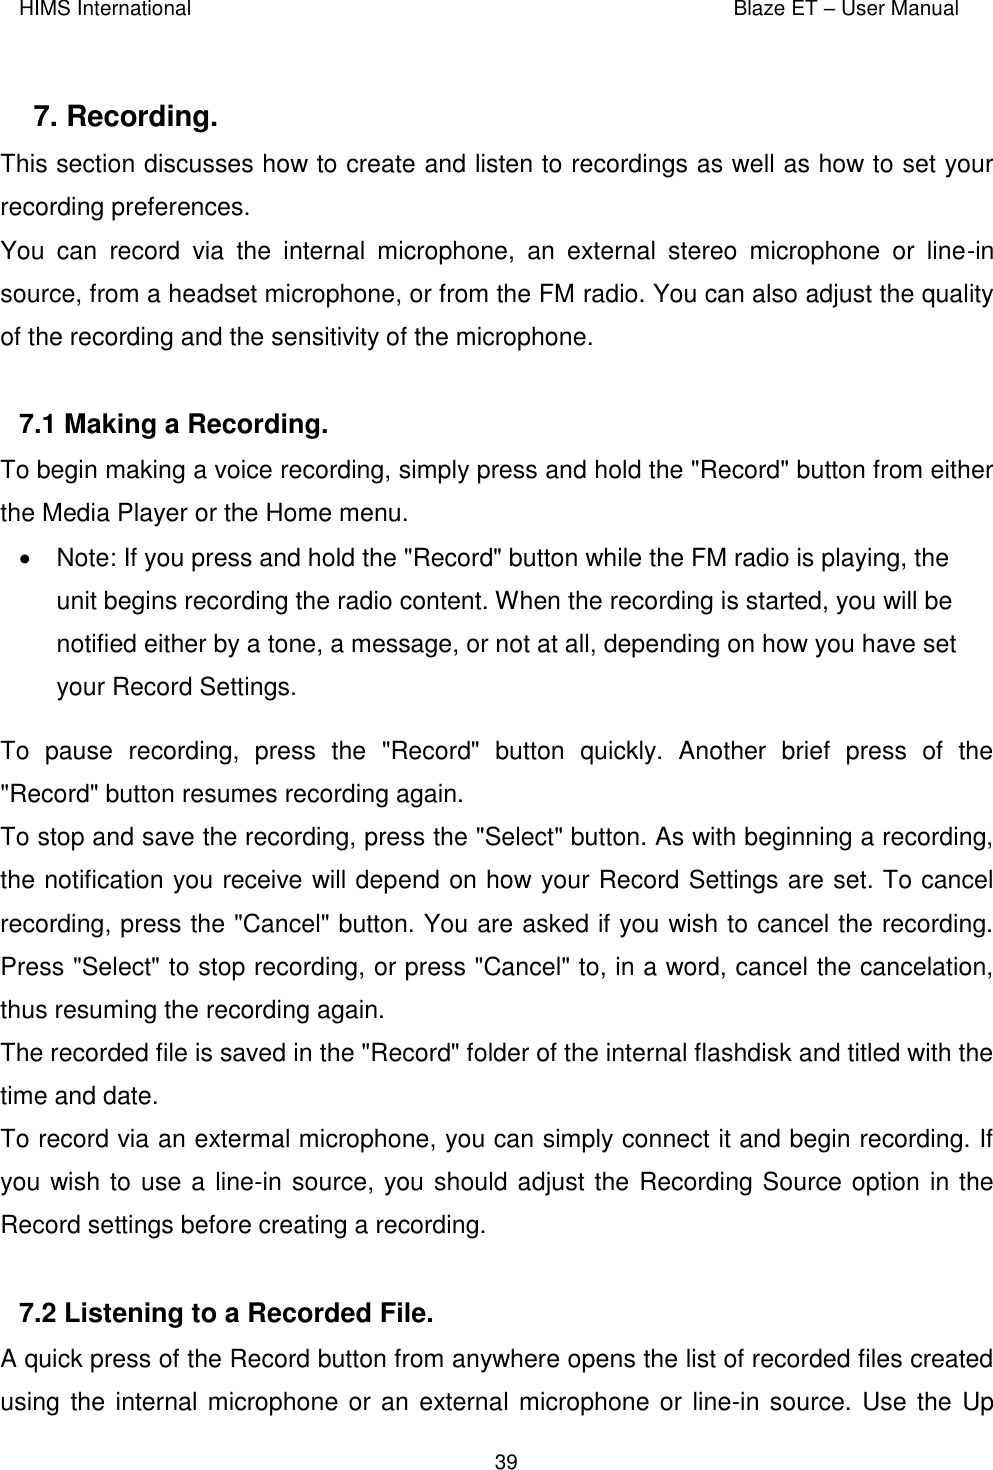 HIMS International    Blaze ET – User Manual      39  7. Recording.  This section discusses how to create and listen to recordings as well as how to set your recording preferences. You  can  record  via  the  internal  microphone,  an  external  stereo  microphone  or  line-in source, from a headset microphone, or from the FM radio. You can also adjust the quality of the recording and the sensitivity of the microphone.  7.1 Making a Recording.  To begin making a voice recording, simply press and hold the &quot;Record&quot; button from either the Media Player or the Home menu.    Note: If you press and hold the &quot;Record&quot; button while the FM radio is playing, the unit begins recording the radio content. When the recording is started, you will be notified either by a tone, a message, or not at all, depending on how you have set your Record Settings. To  pause  recording,  press  the  &quot;Record&quot;  button  quickly.  Another  brief  press  of  the &quot;Record&quot; button resumes recording again. To stop and save the recording, press the &quot;Select&quot; button. As with beginning a recording, the notification you receive will depend on how your Record Settings are set. To cancel recording, press the &quot;Cancel&quot; button. You are asked if you wish to cancel the recording. Press &quot;Select&quot; to stop recording, or press &quot;Cancel&quot; to, in a word, cancel the cancelation, thus resuming the recording again. The recorded file is saved in the &quot;Record&quot; folder of the internal flashdisk and titled with the time and date.  To record via an extermal microphone, you can simply connect it and begin recording. If you wish to use a line-in source, you should adjust the Recording Source option in the Record settings before creating a recording.   7.2 Listening to a Recorded File.  A quick press of the Record button from anywhere opens the list of recorded files created using the internal microphone or an external microphone or line-in source. Use the Up 